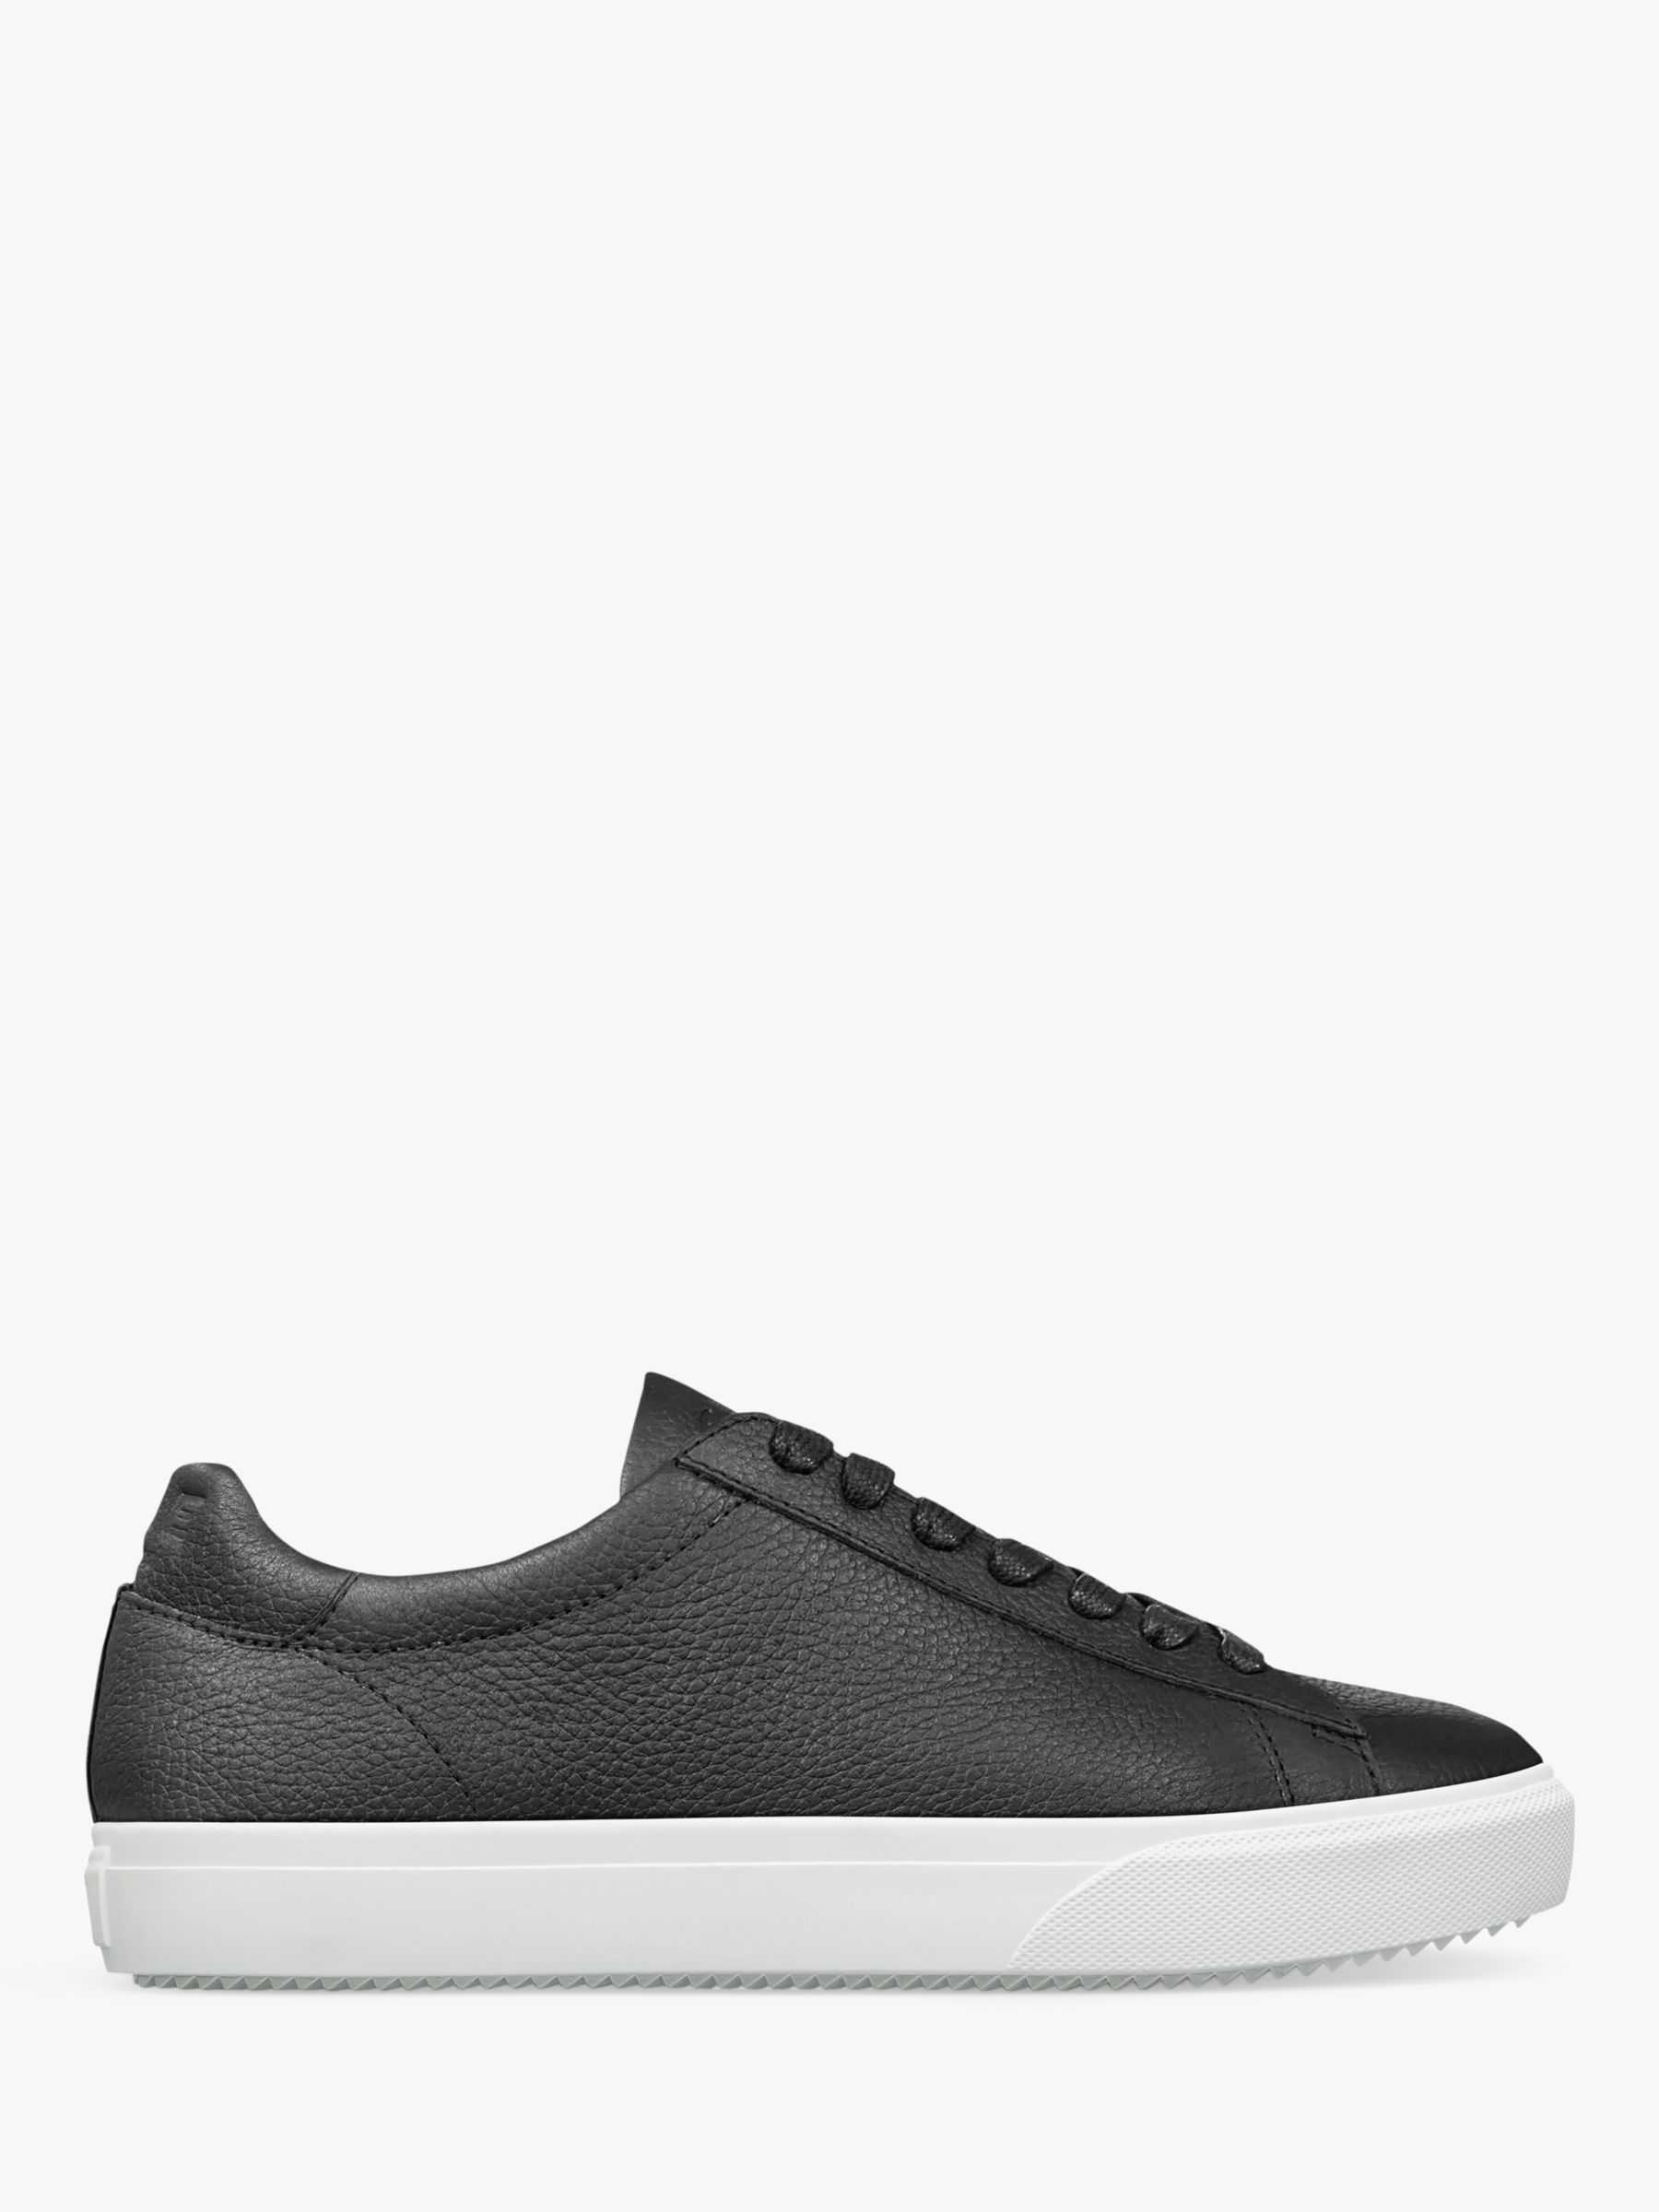 CLAE Bradley Venice Leather Lace Up Trainers, Black/White at John Lewis ...